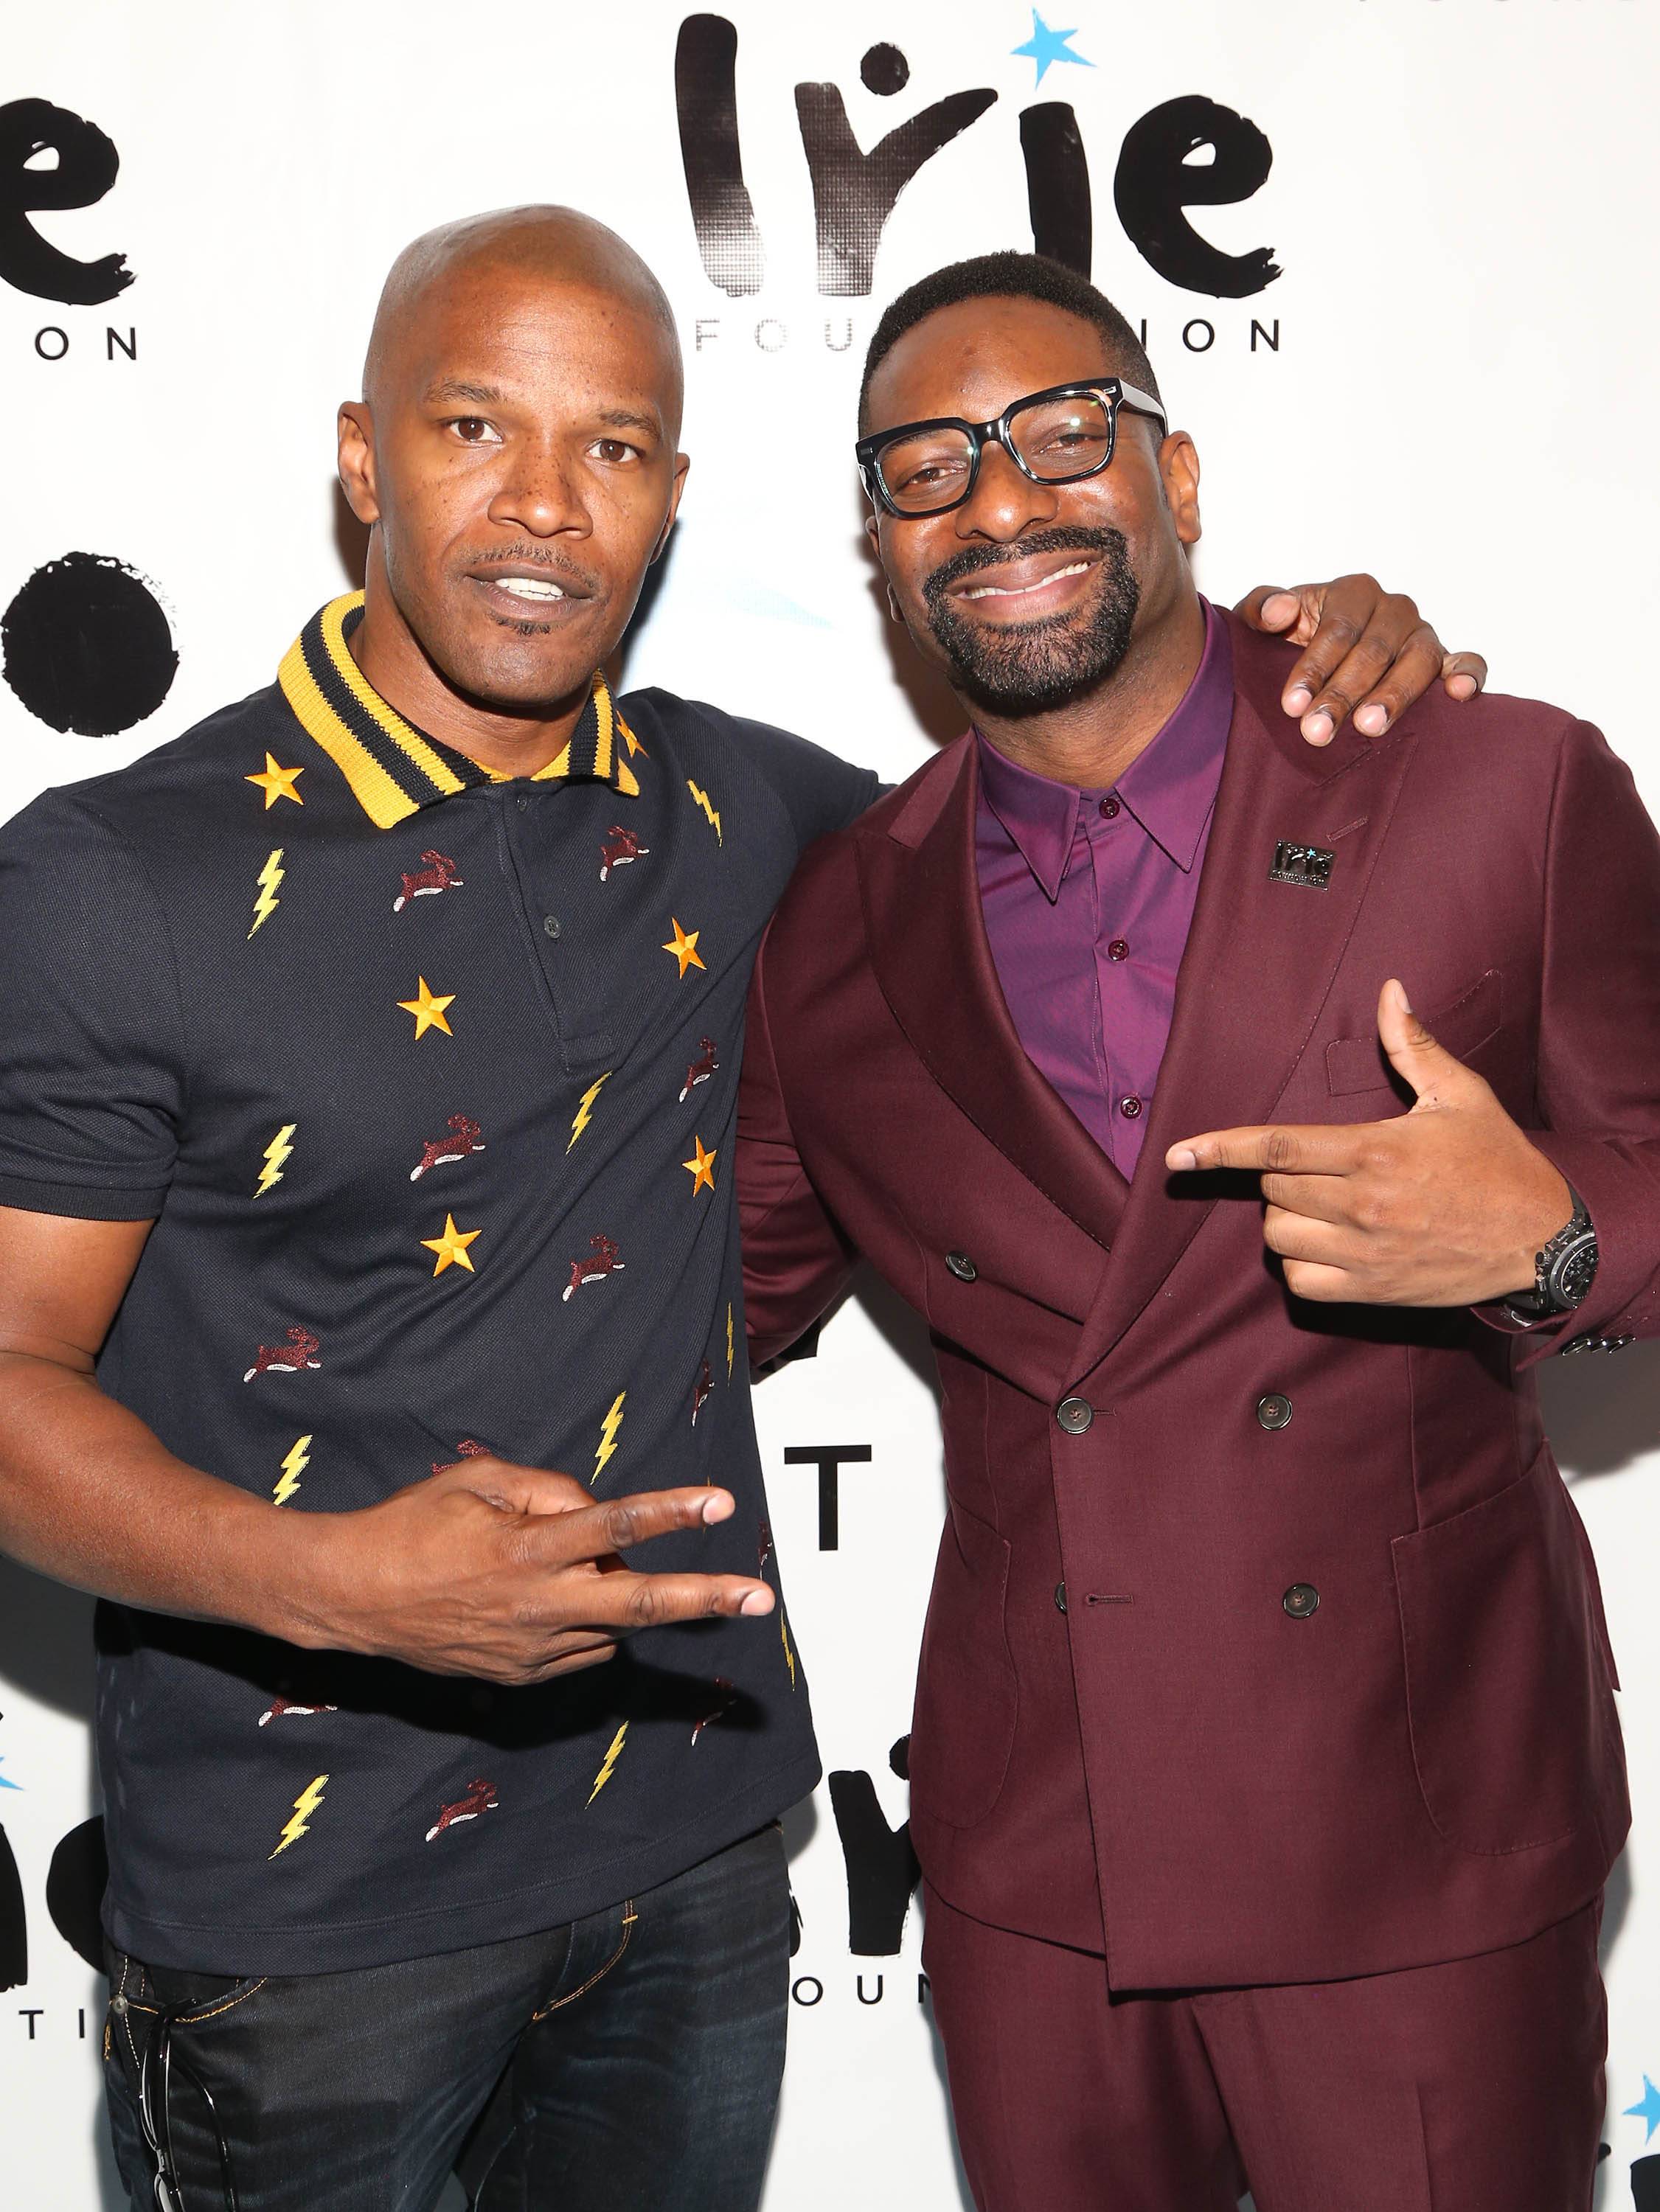 Pharrell Williams and Usher both wear color-coordinated outfits